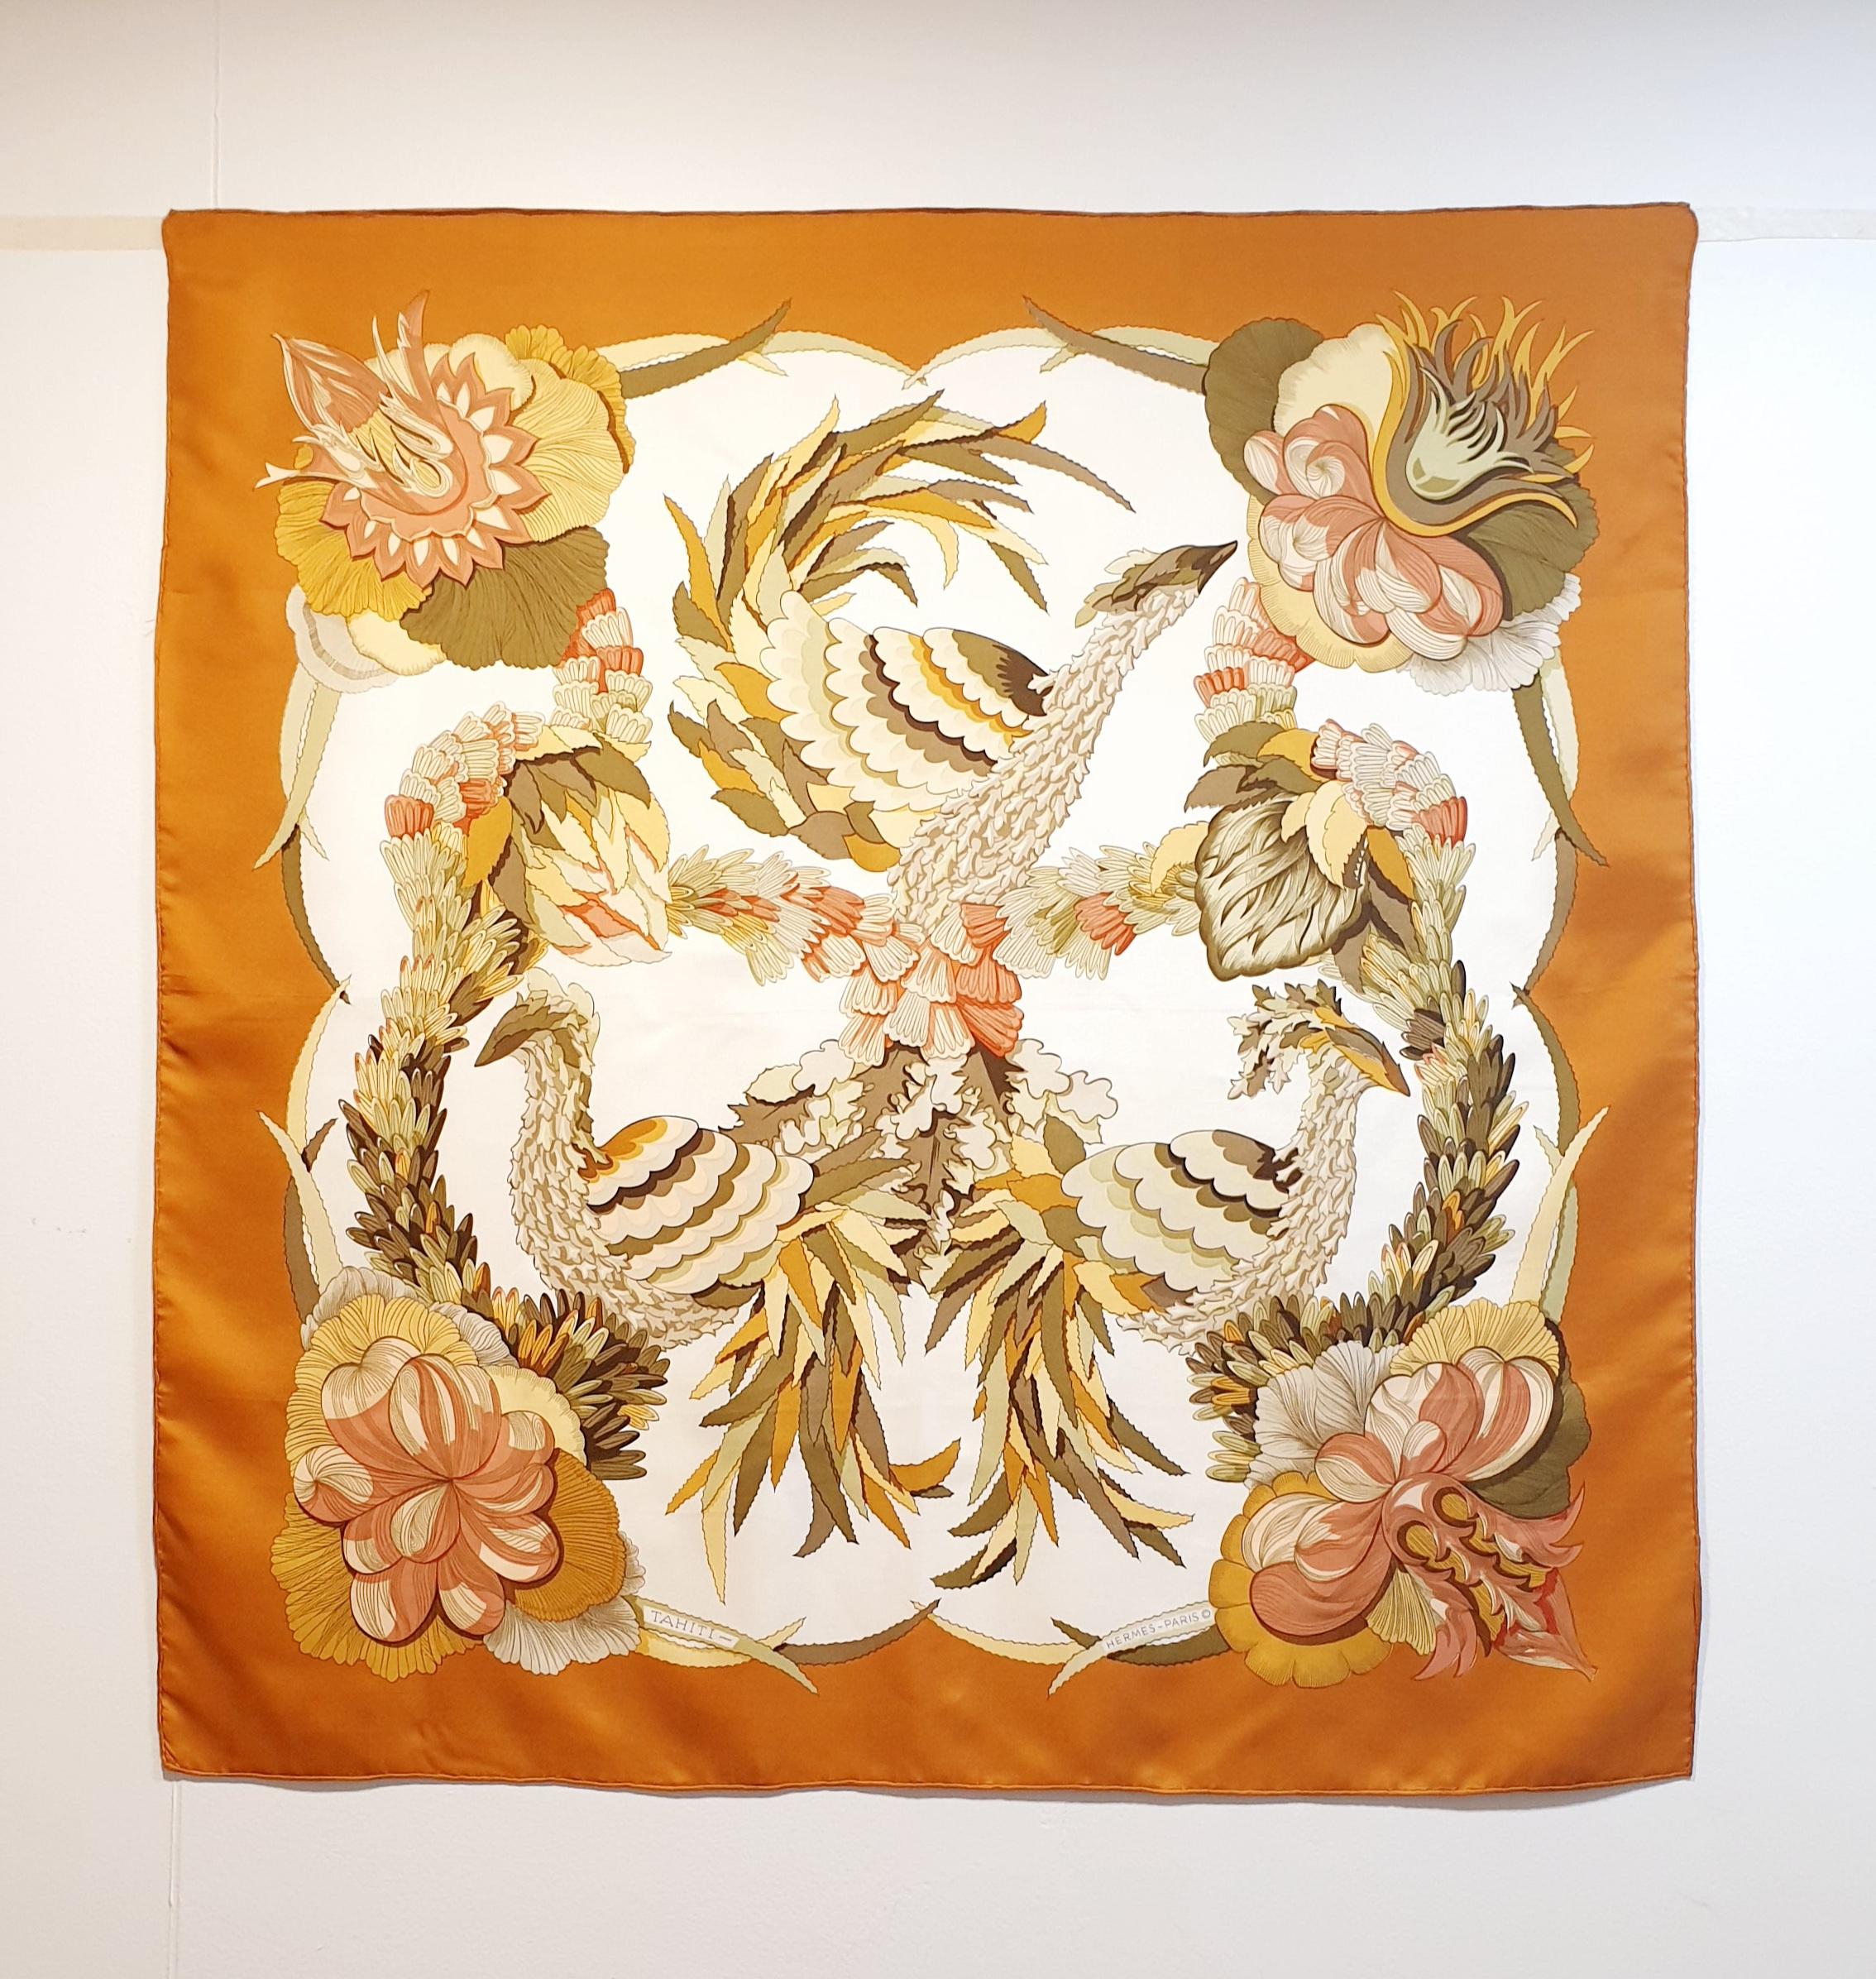 HERMES Scarf  Silk Scarf 100%  Paris, Made In France 
Beautiful Caty Latham's Tahiti is a lovely Hermes silk scarf here in a pretty colorway and from either the original or early issue.
Vintage-preowned – 
Excellent condition. It is finished with